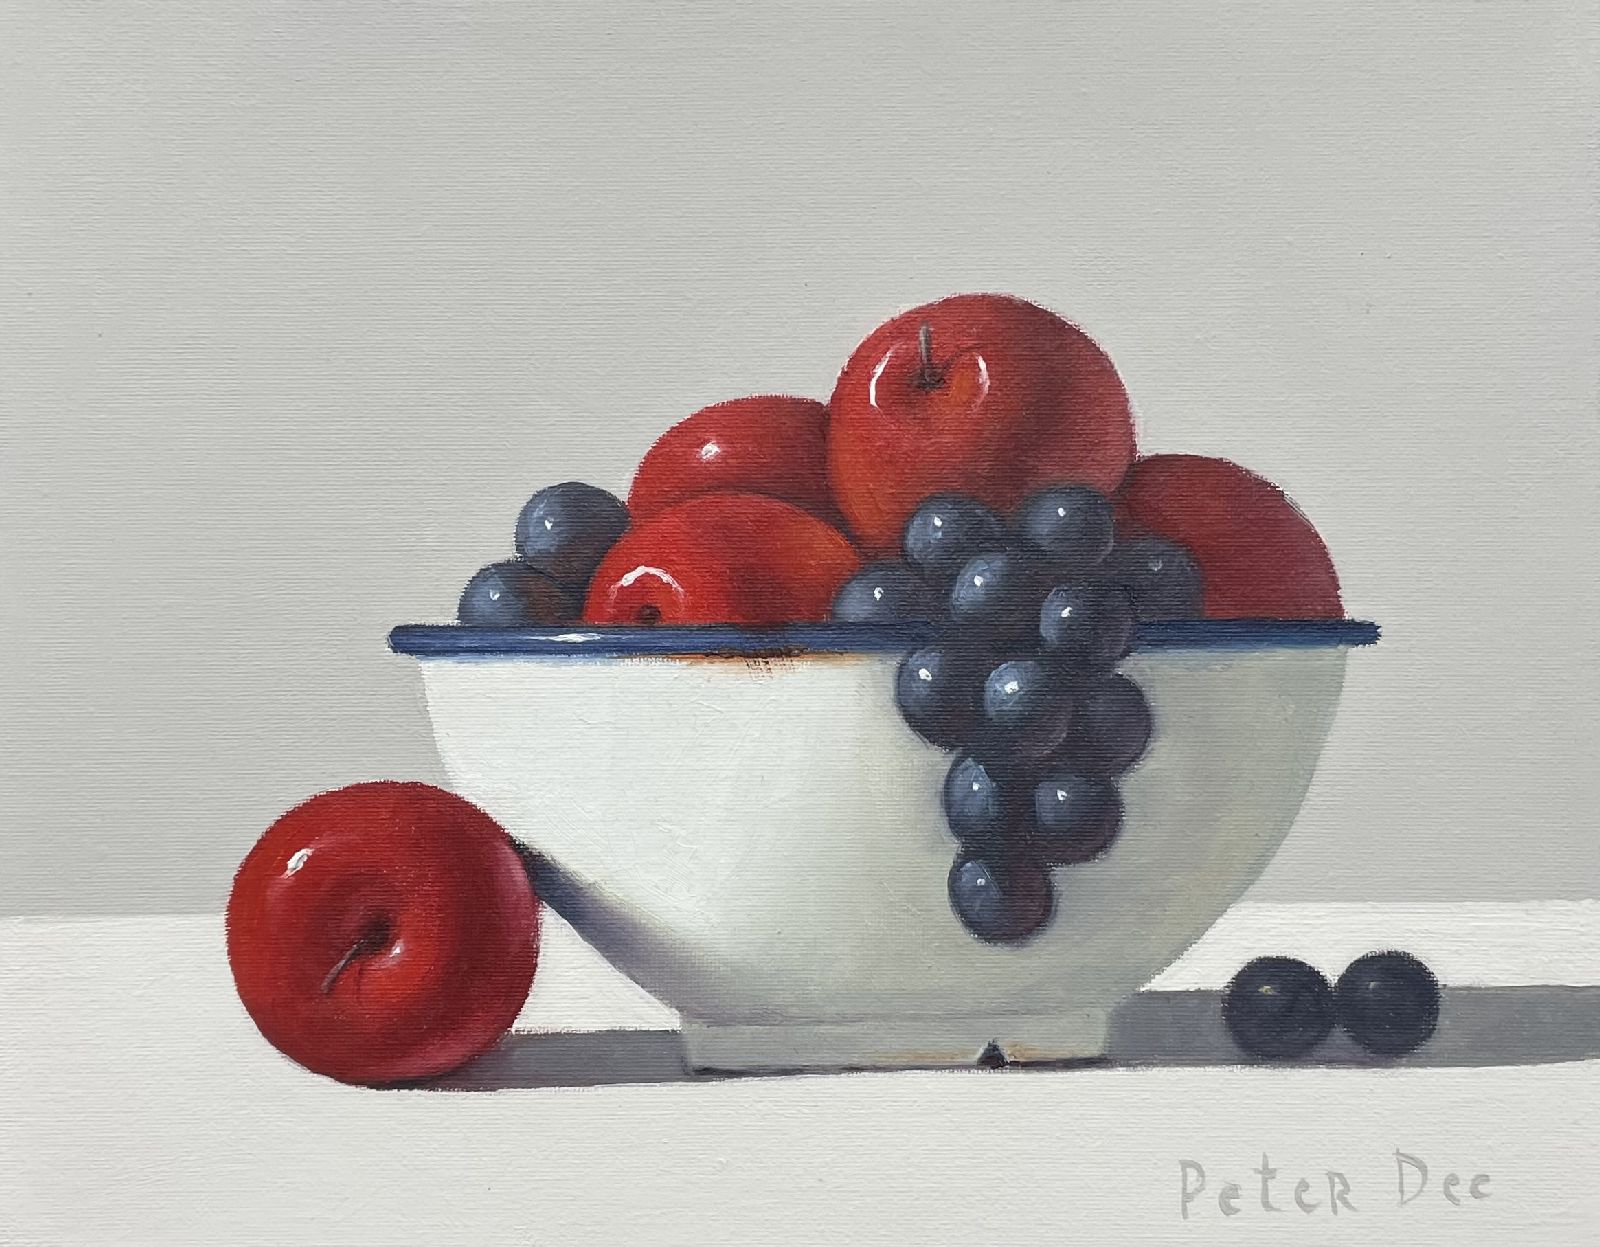 Peter Dee - Apples and Grapes in White Bowl